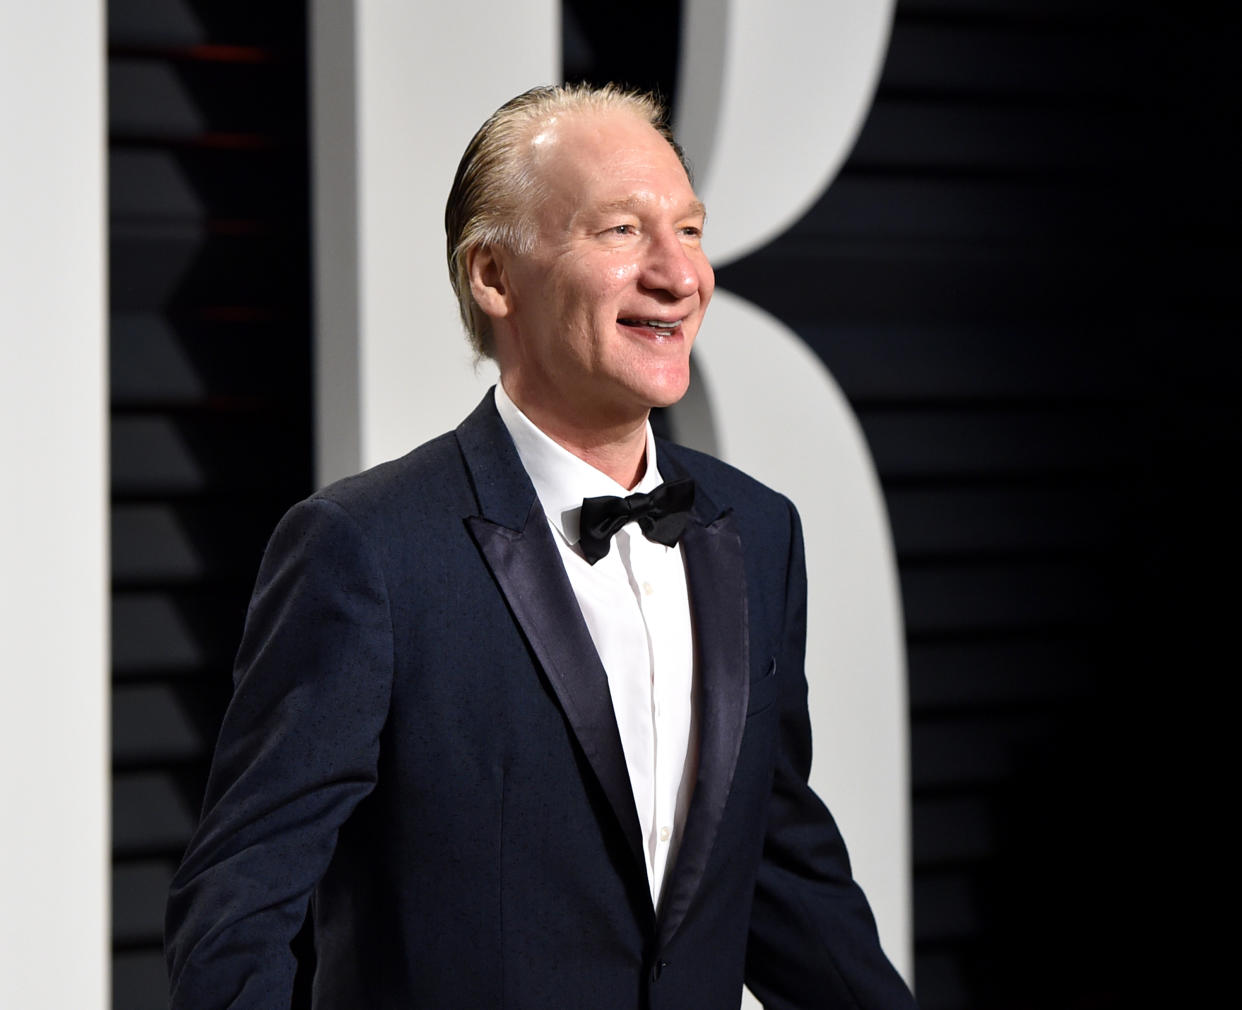 "Real Time" host Bill Maher defended former MSNBC host Chris Matthews, who resigned from Hardball in March. (Photo: Getty Images)